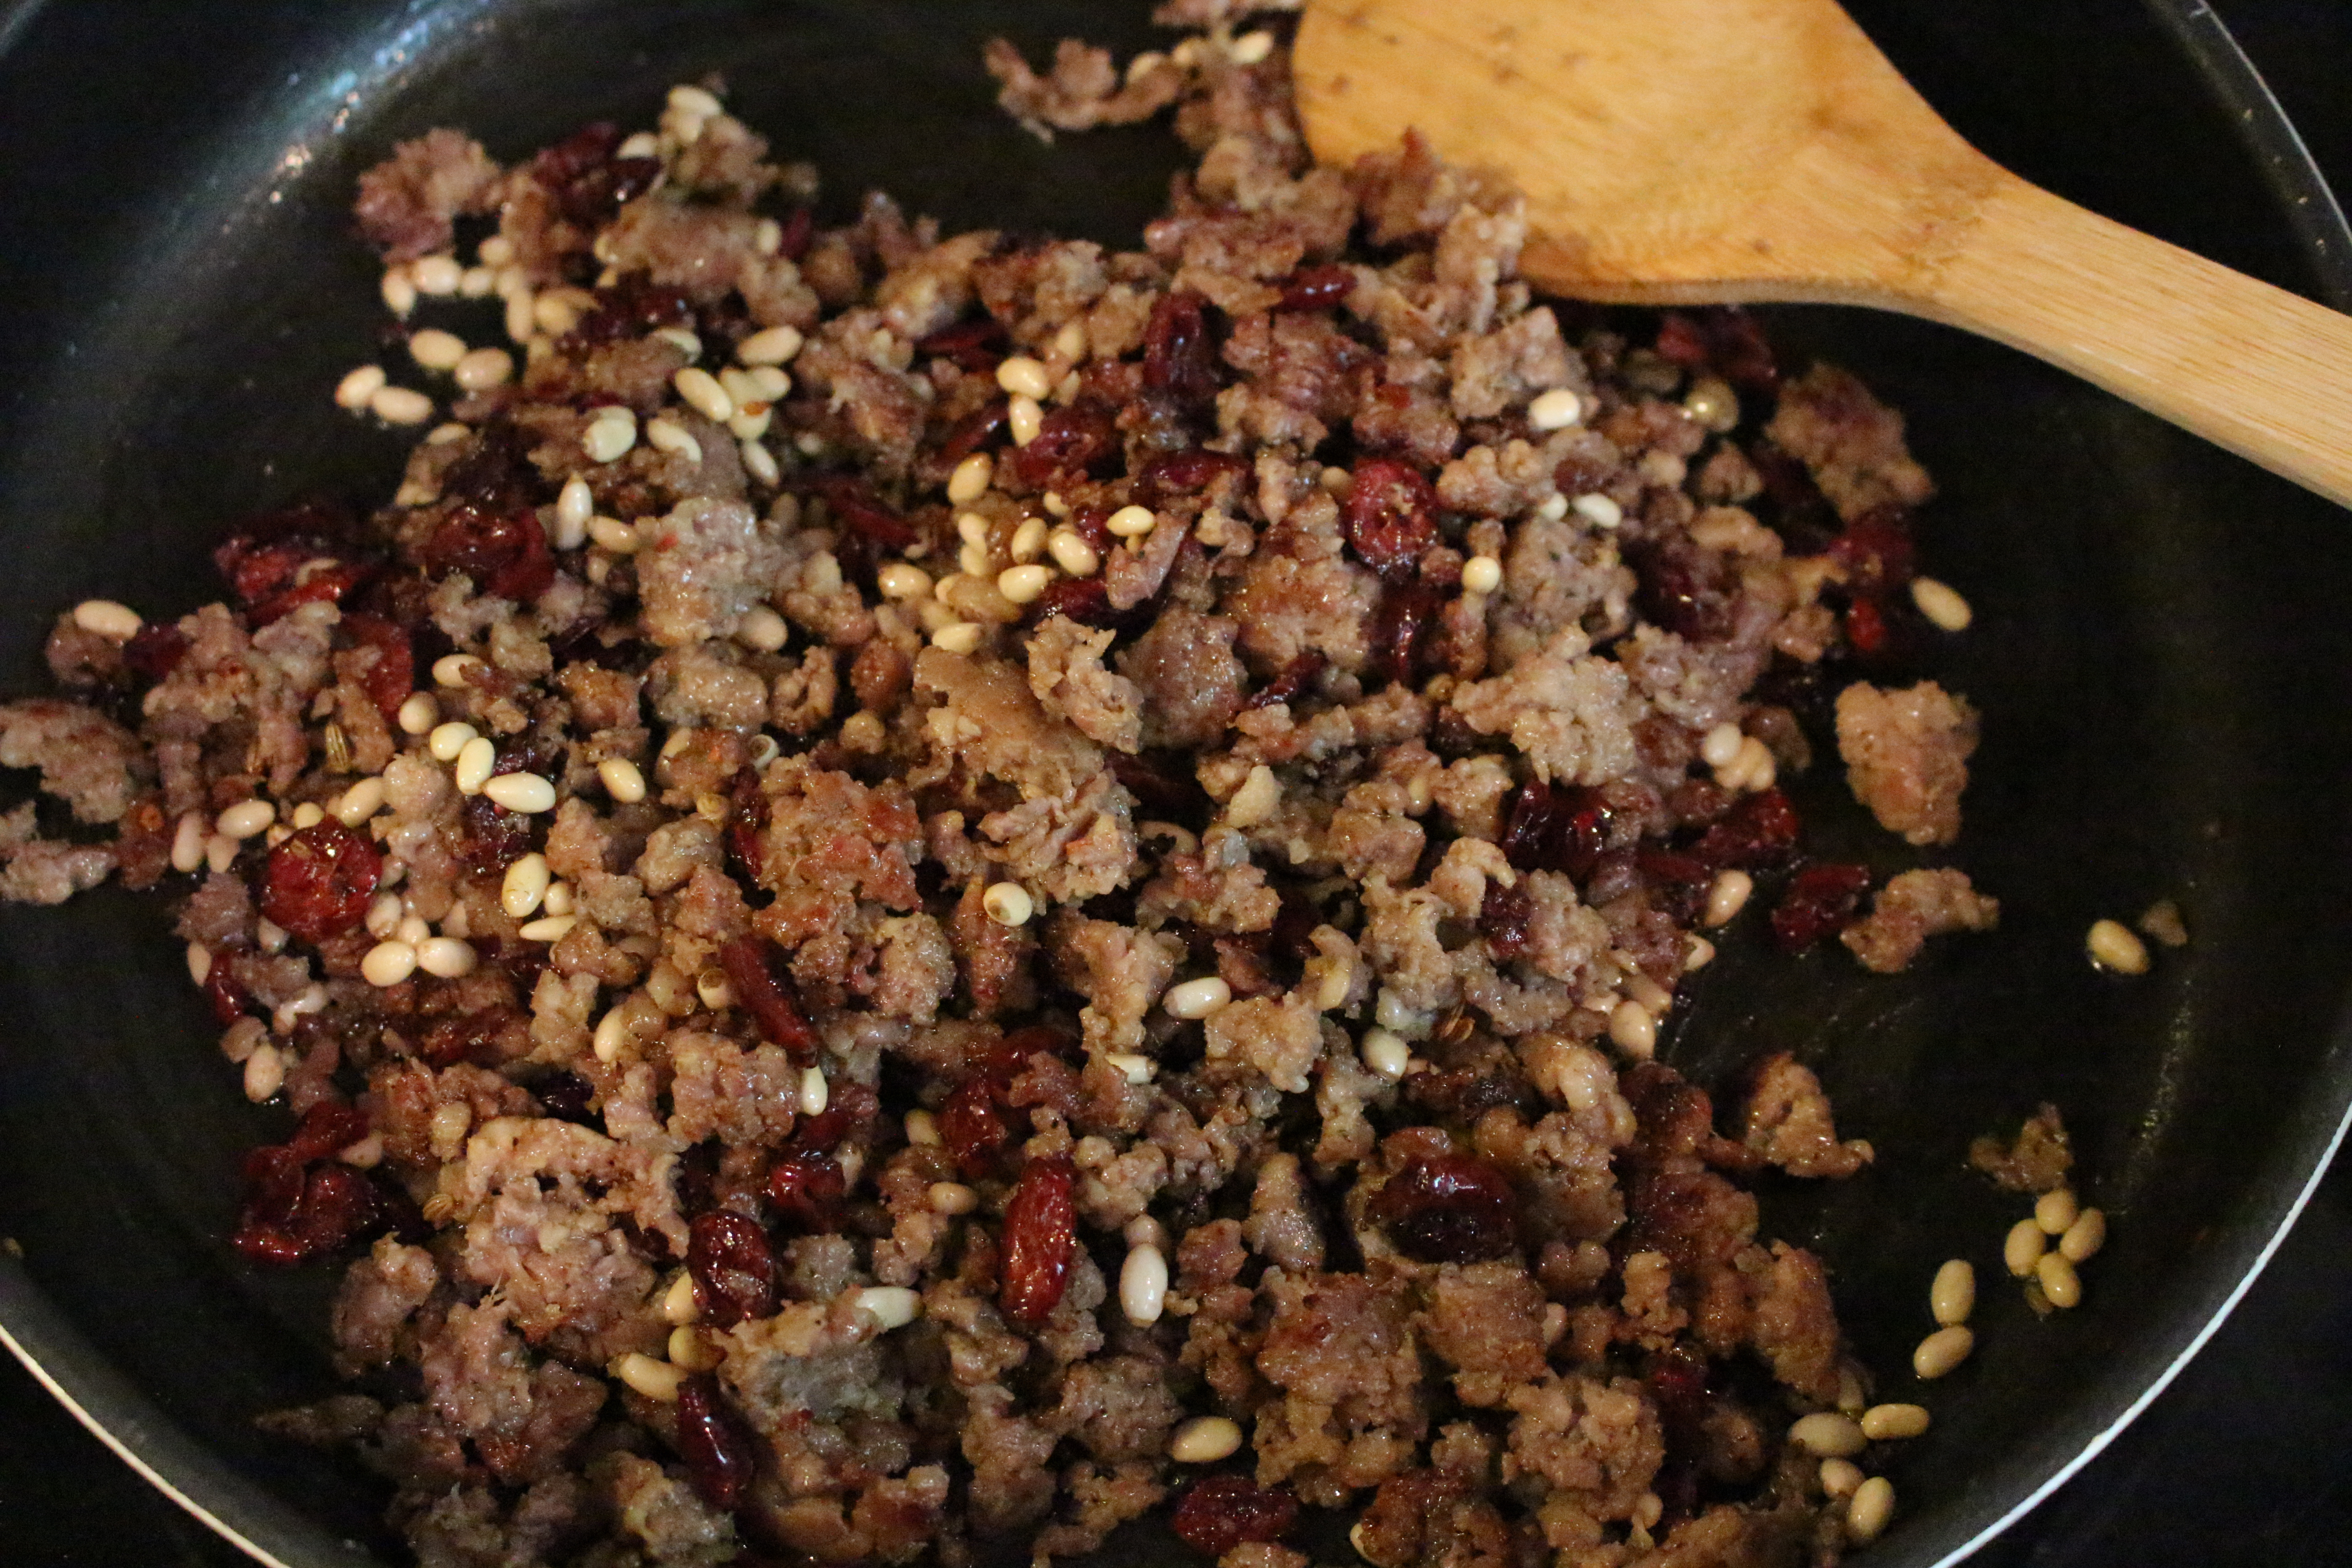 Ground sausage with pine nuts and cranberries by www.whitecottagehomeandliving.com